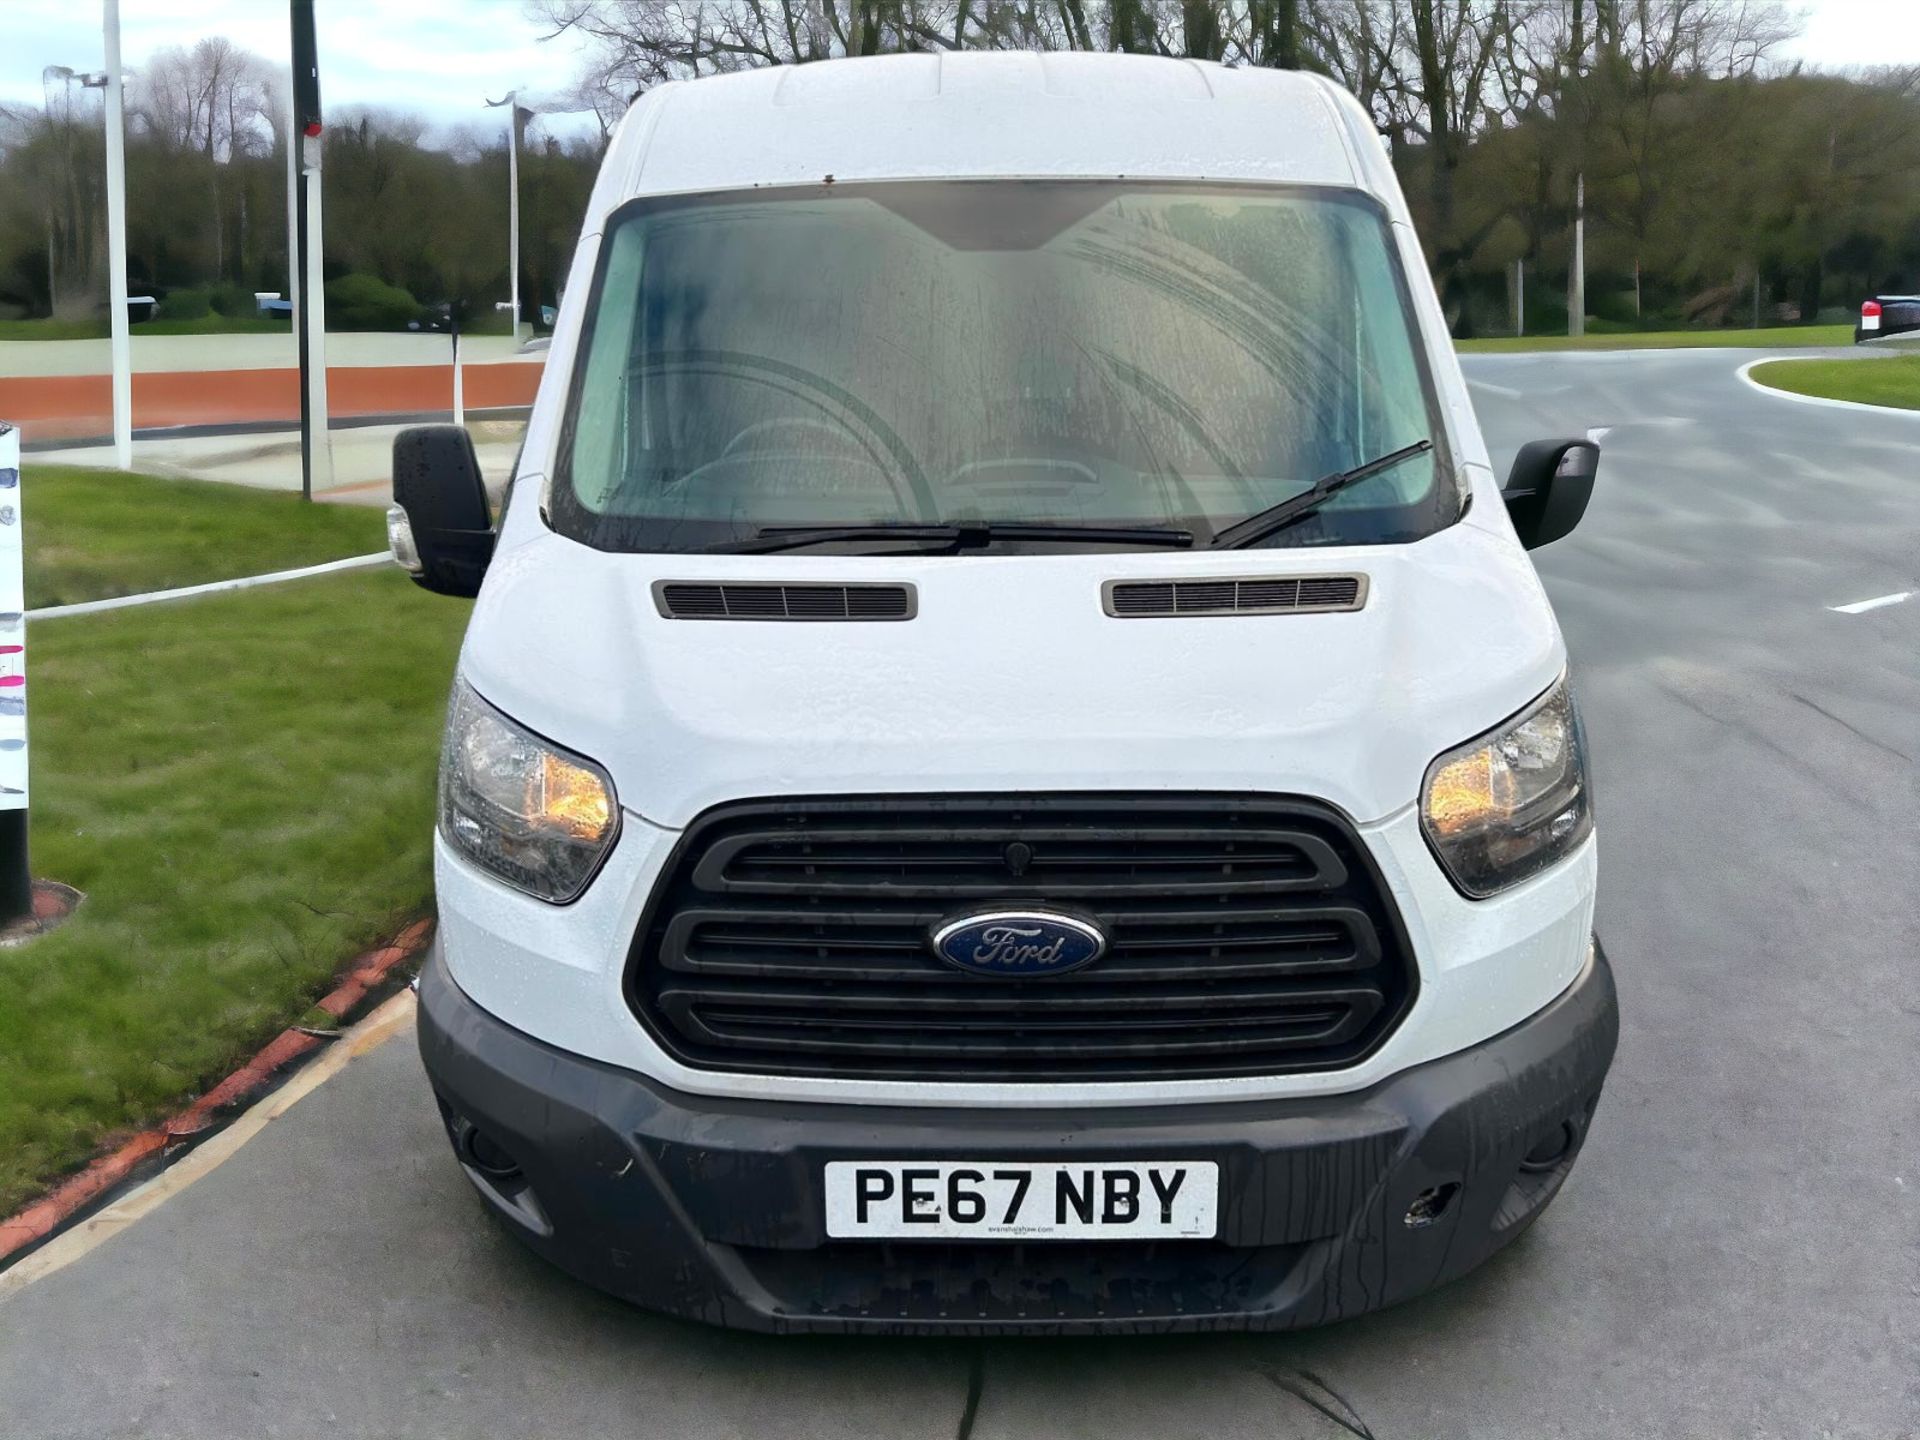 2017-67 REG FORD TRANSIT T350 RWD L3H2 HPI CLEAR - READY TO GO! - Image 2 of 11